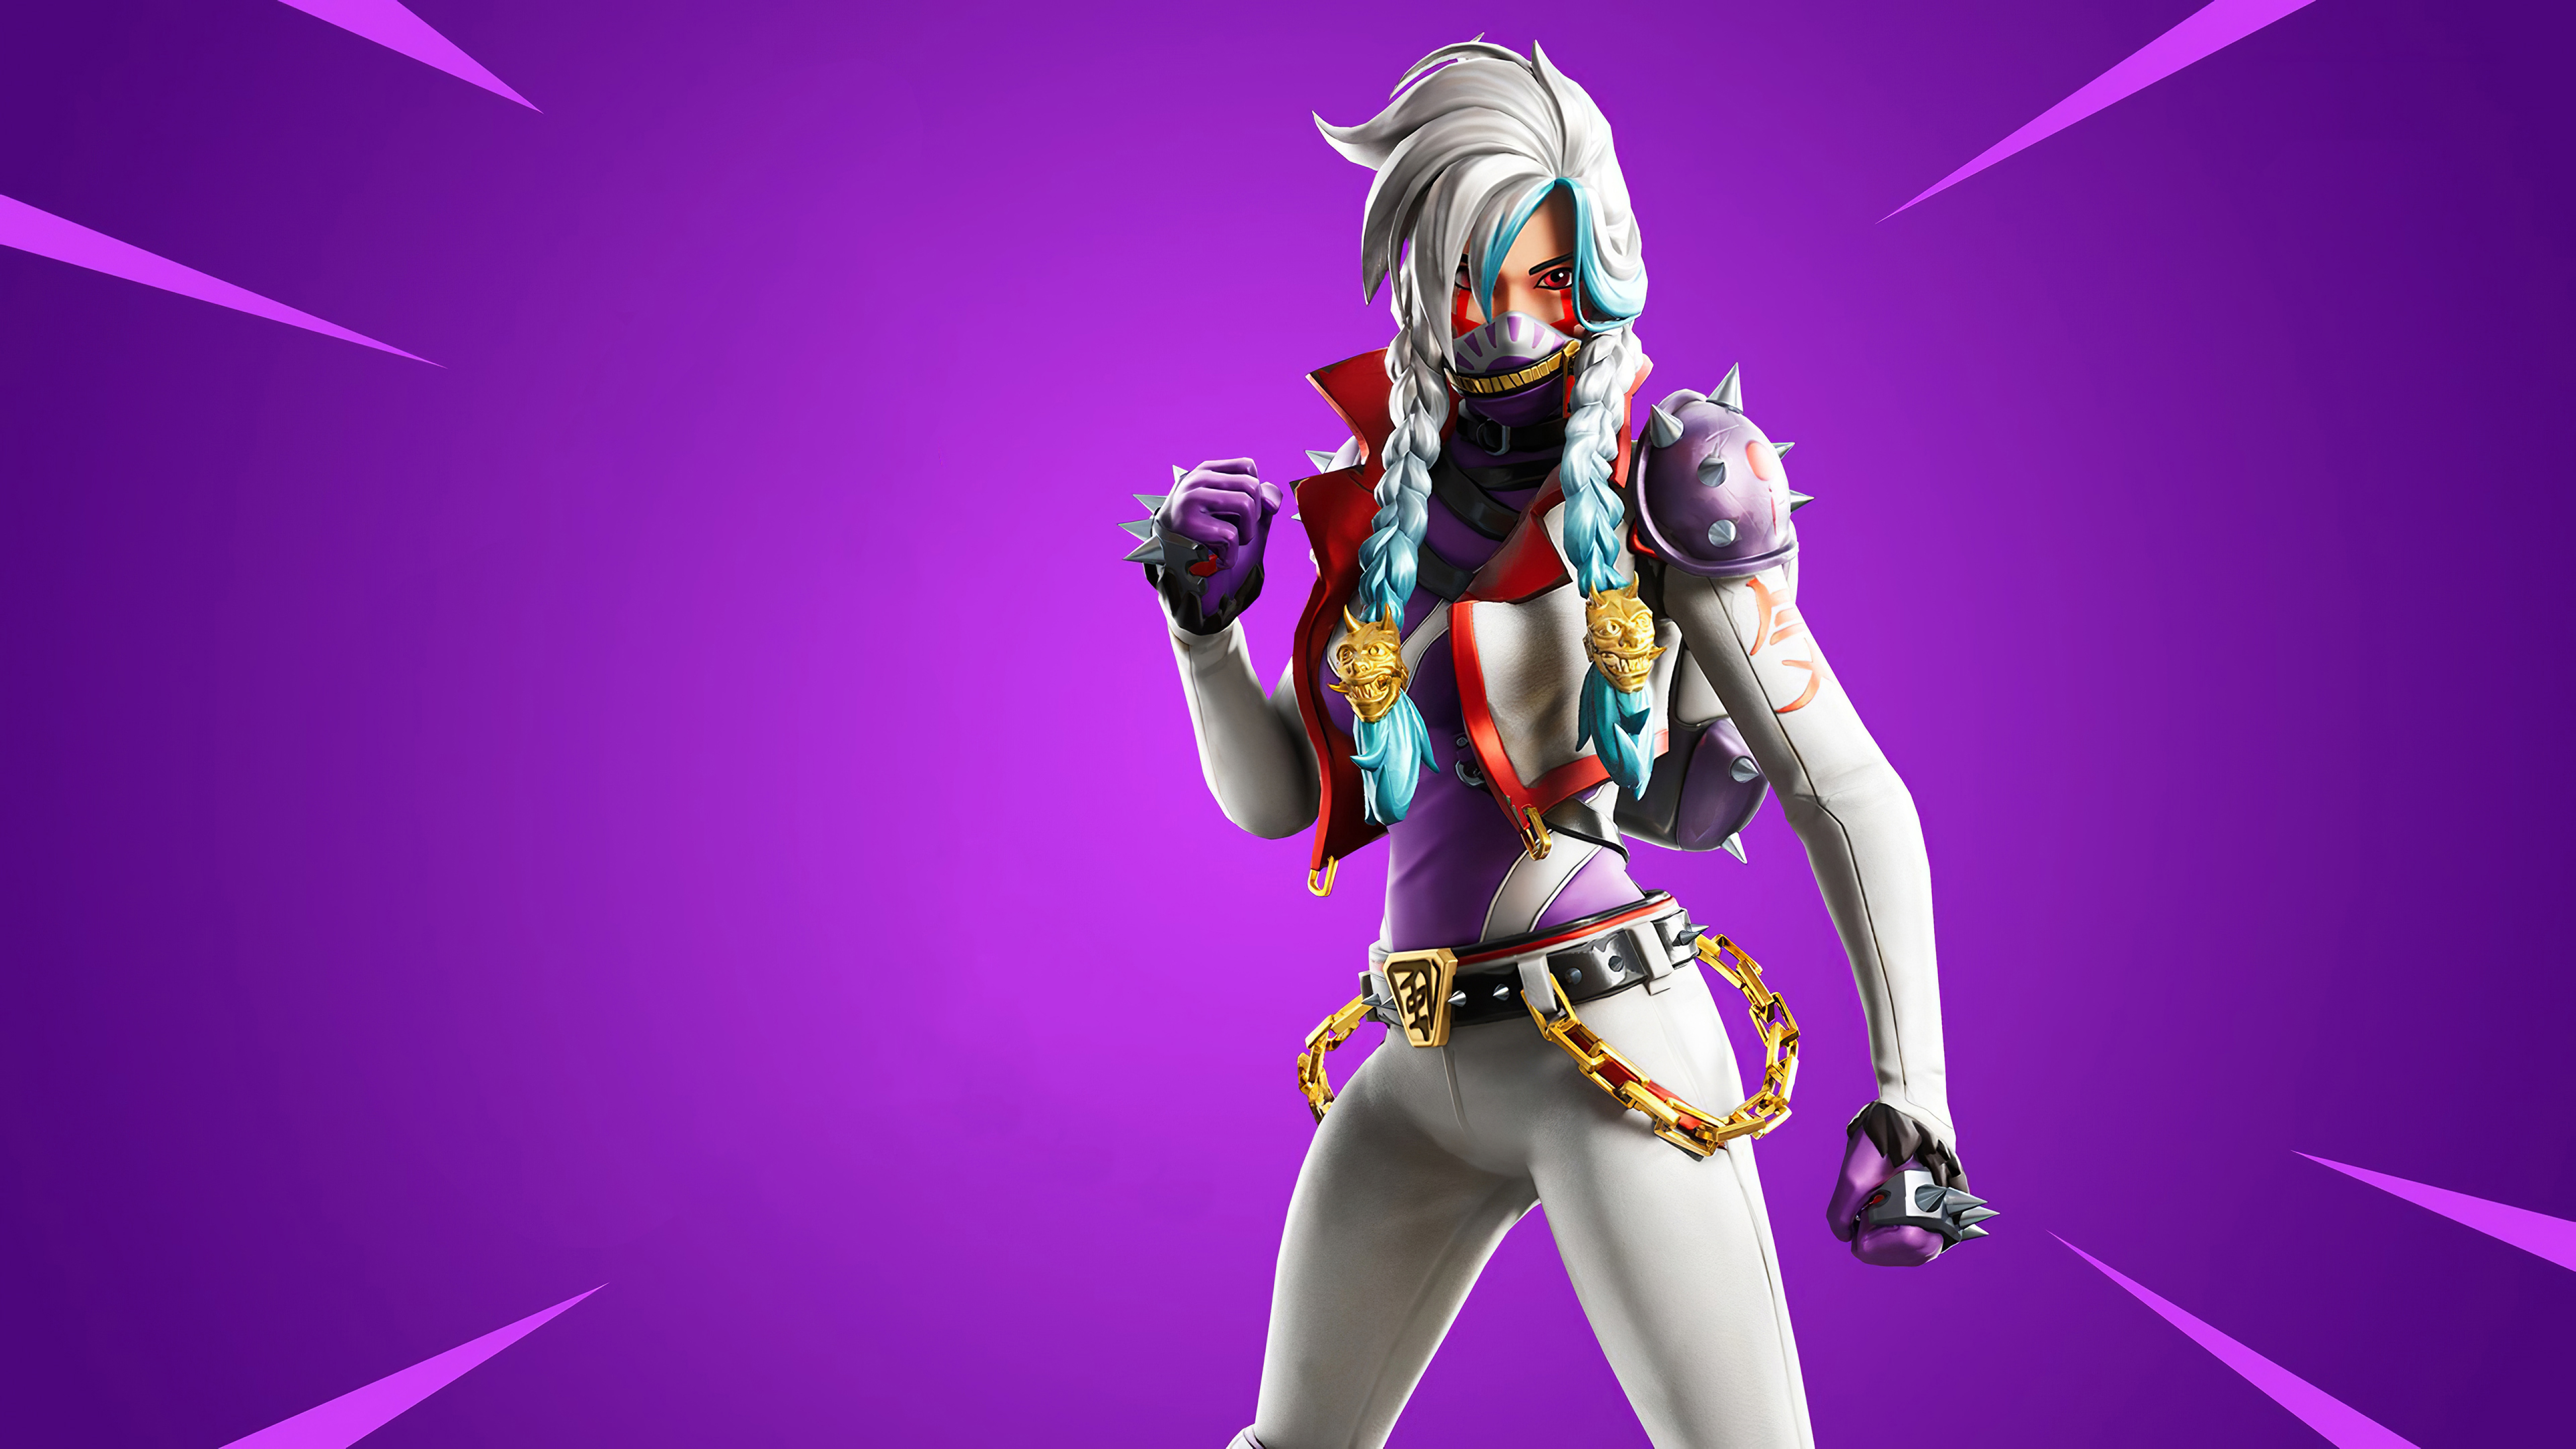 New Payback Fortnite Outfit 5k Wallpaper HD Games 4k